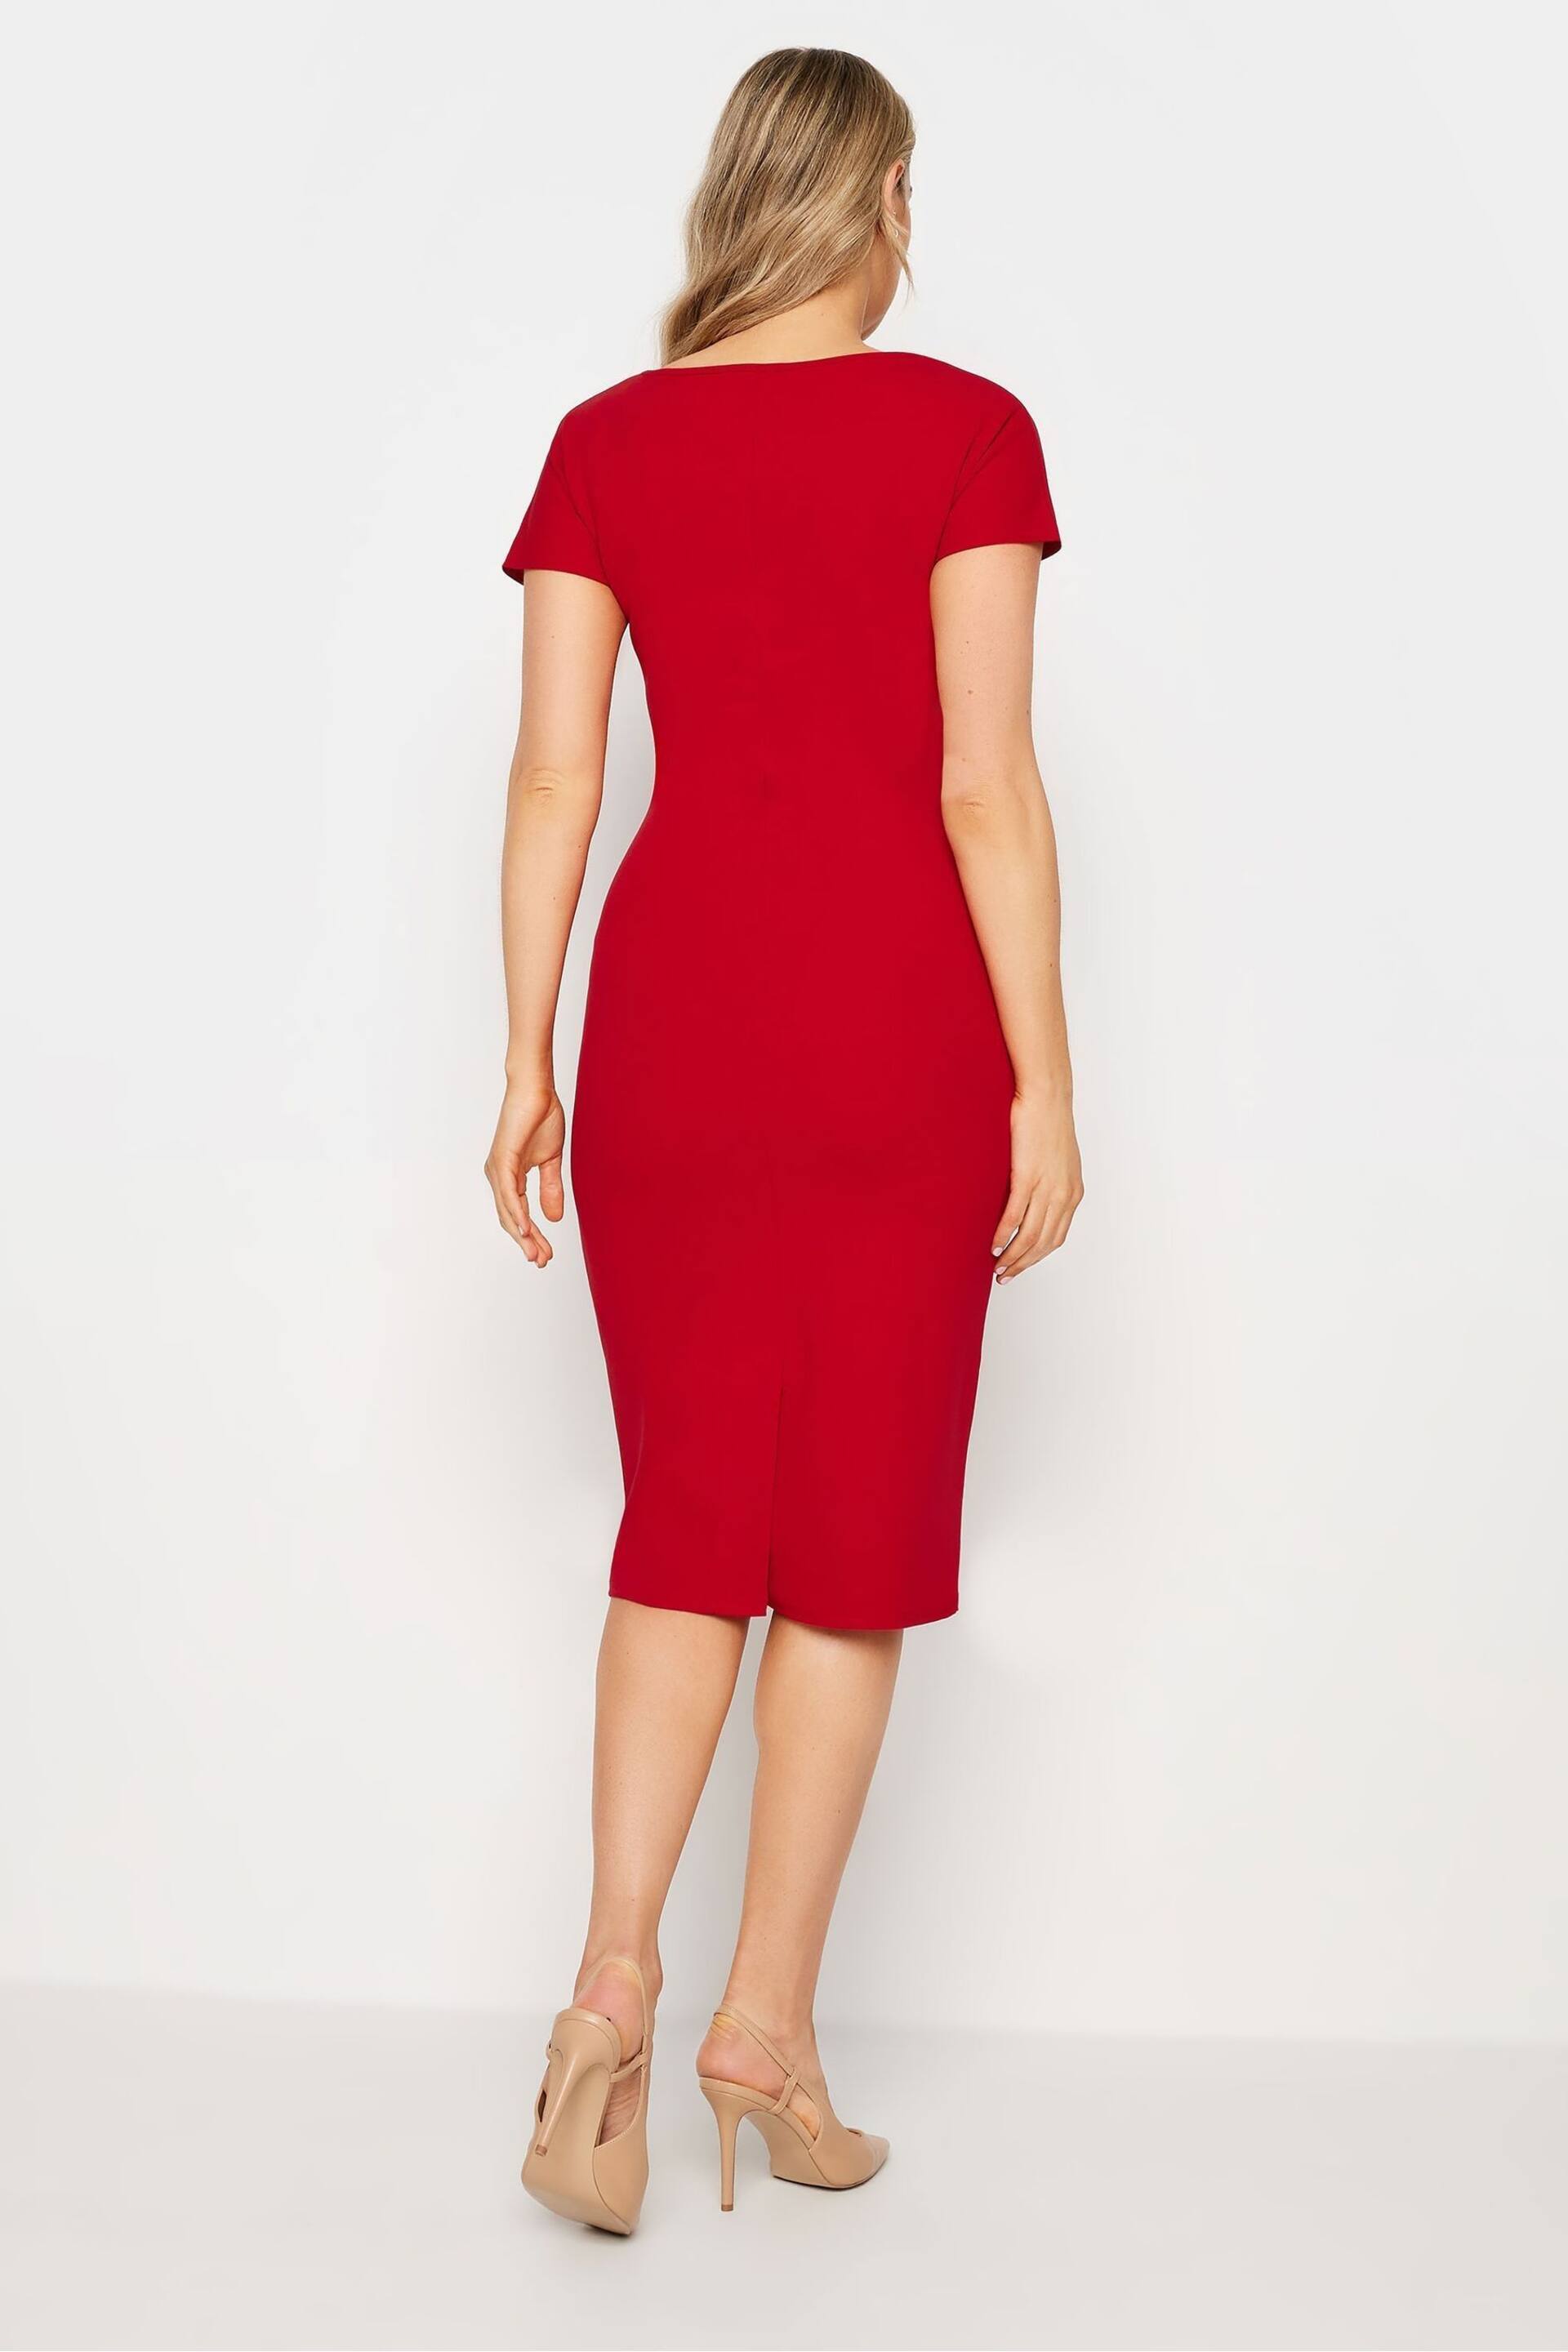 Long Tall Sally Red Flutter Sleeve Scoop Neck Dress - Image 2 of 5